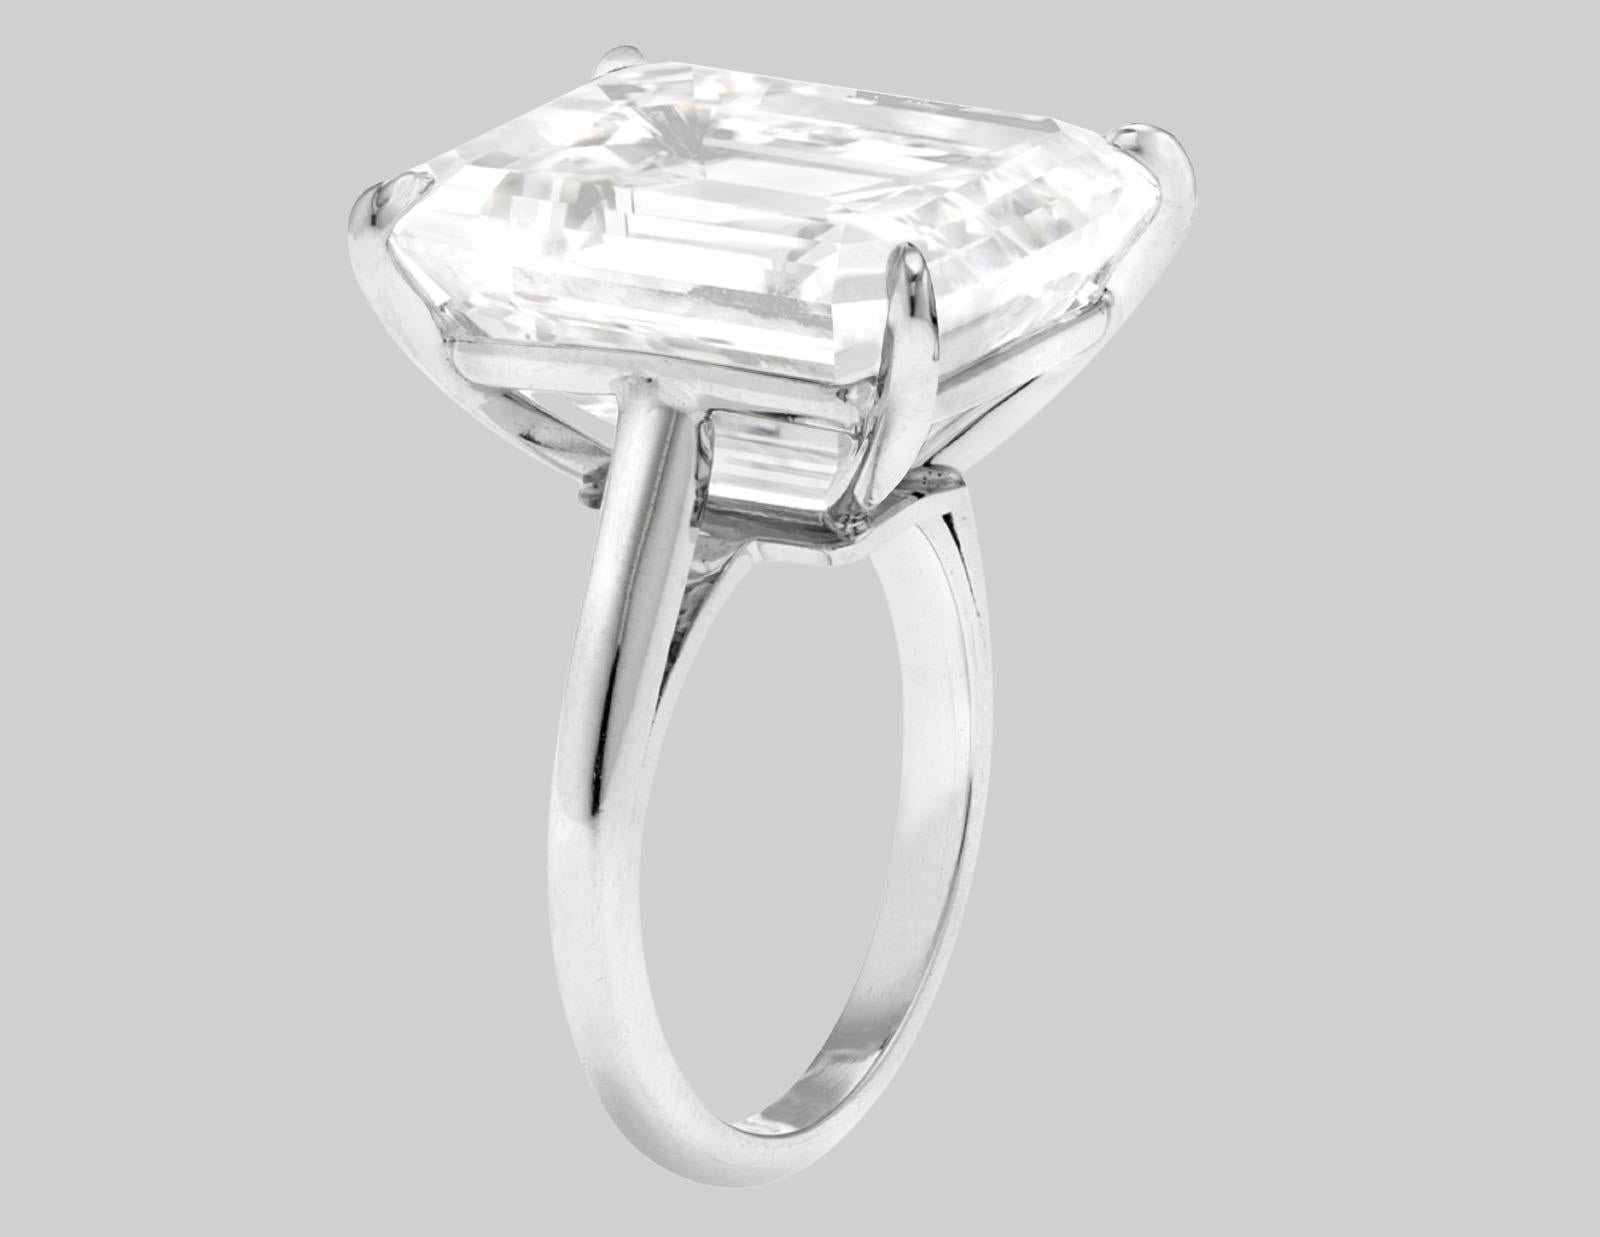 This exquisite ring features a GIA-certified Emerald cut diamond, elegantly presented in a classic solitaire setting, exemplifying sophistication and timeless design.

**Center Diamond:**  
At the heart of this remarkable piece is an 17-carat